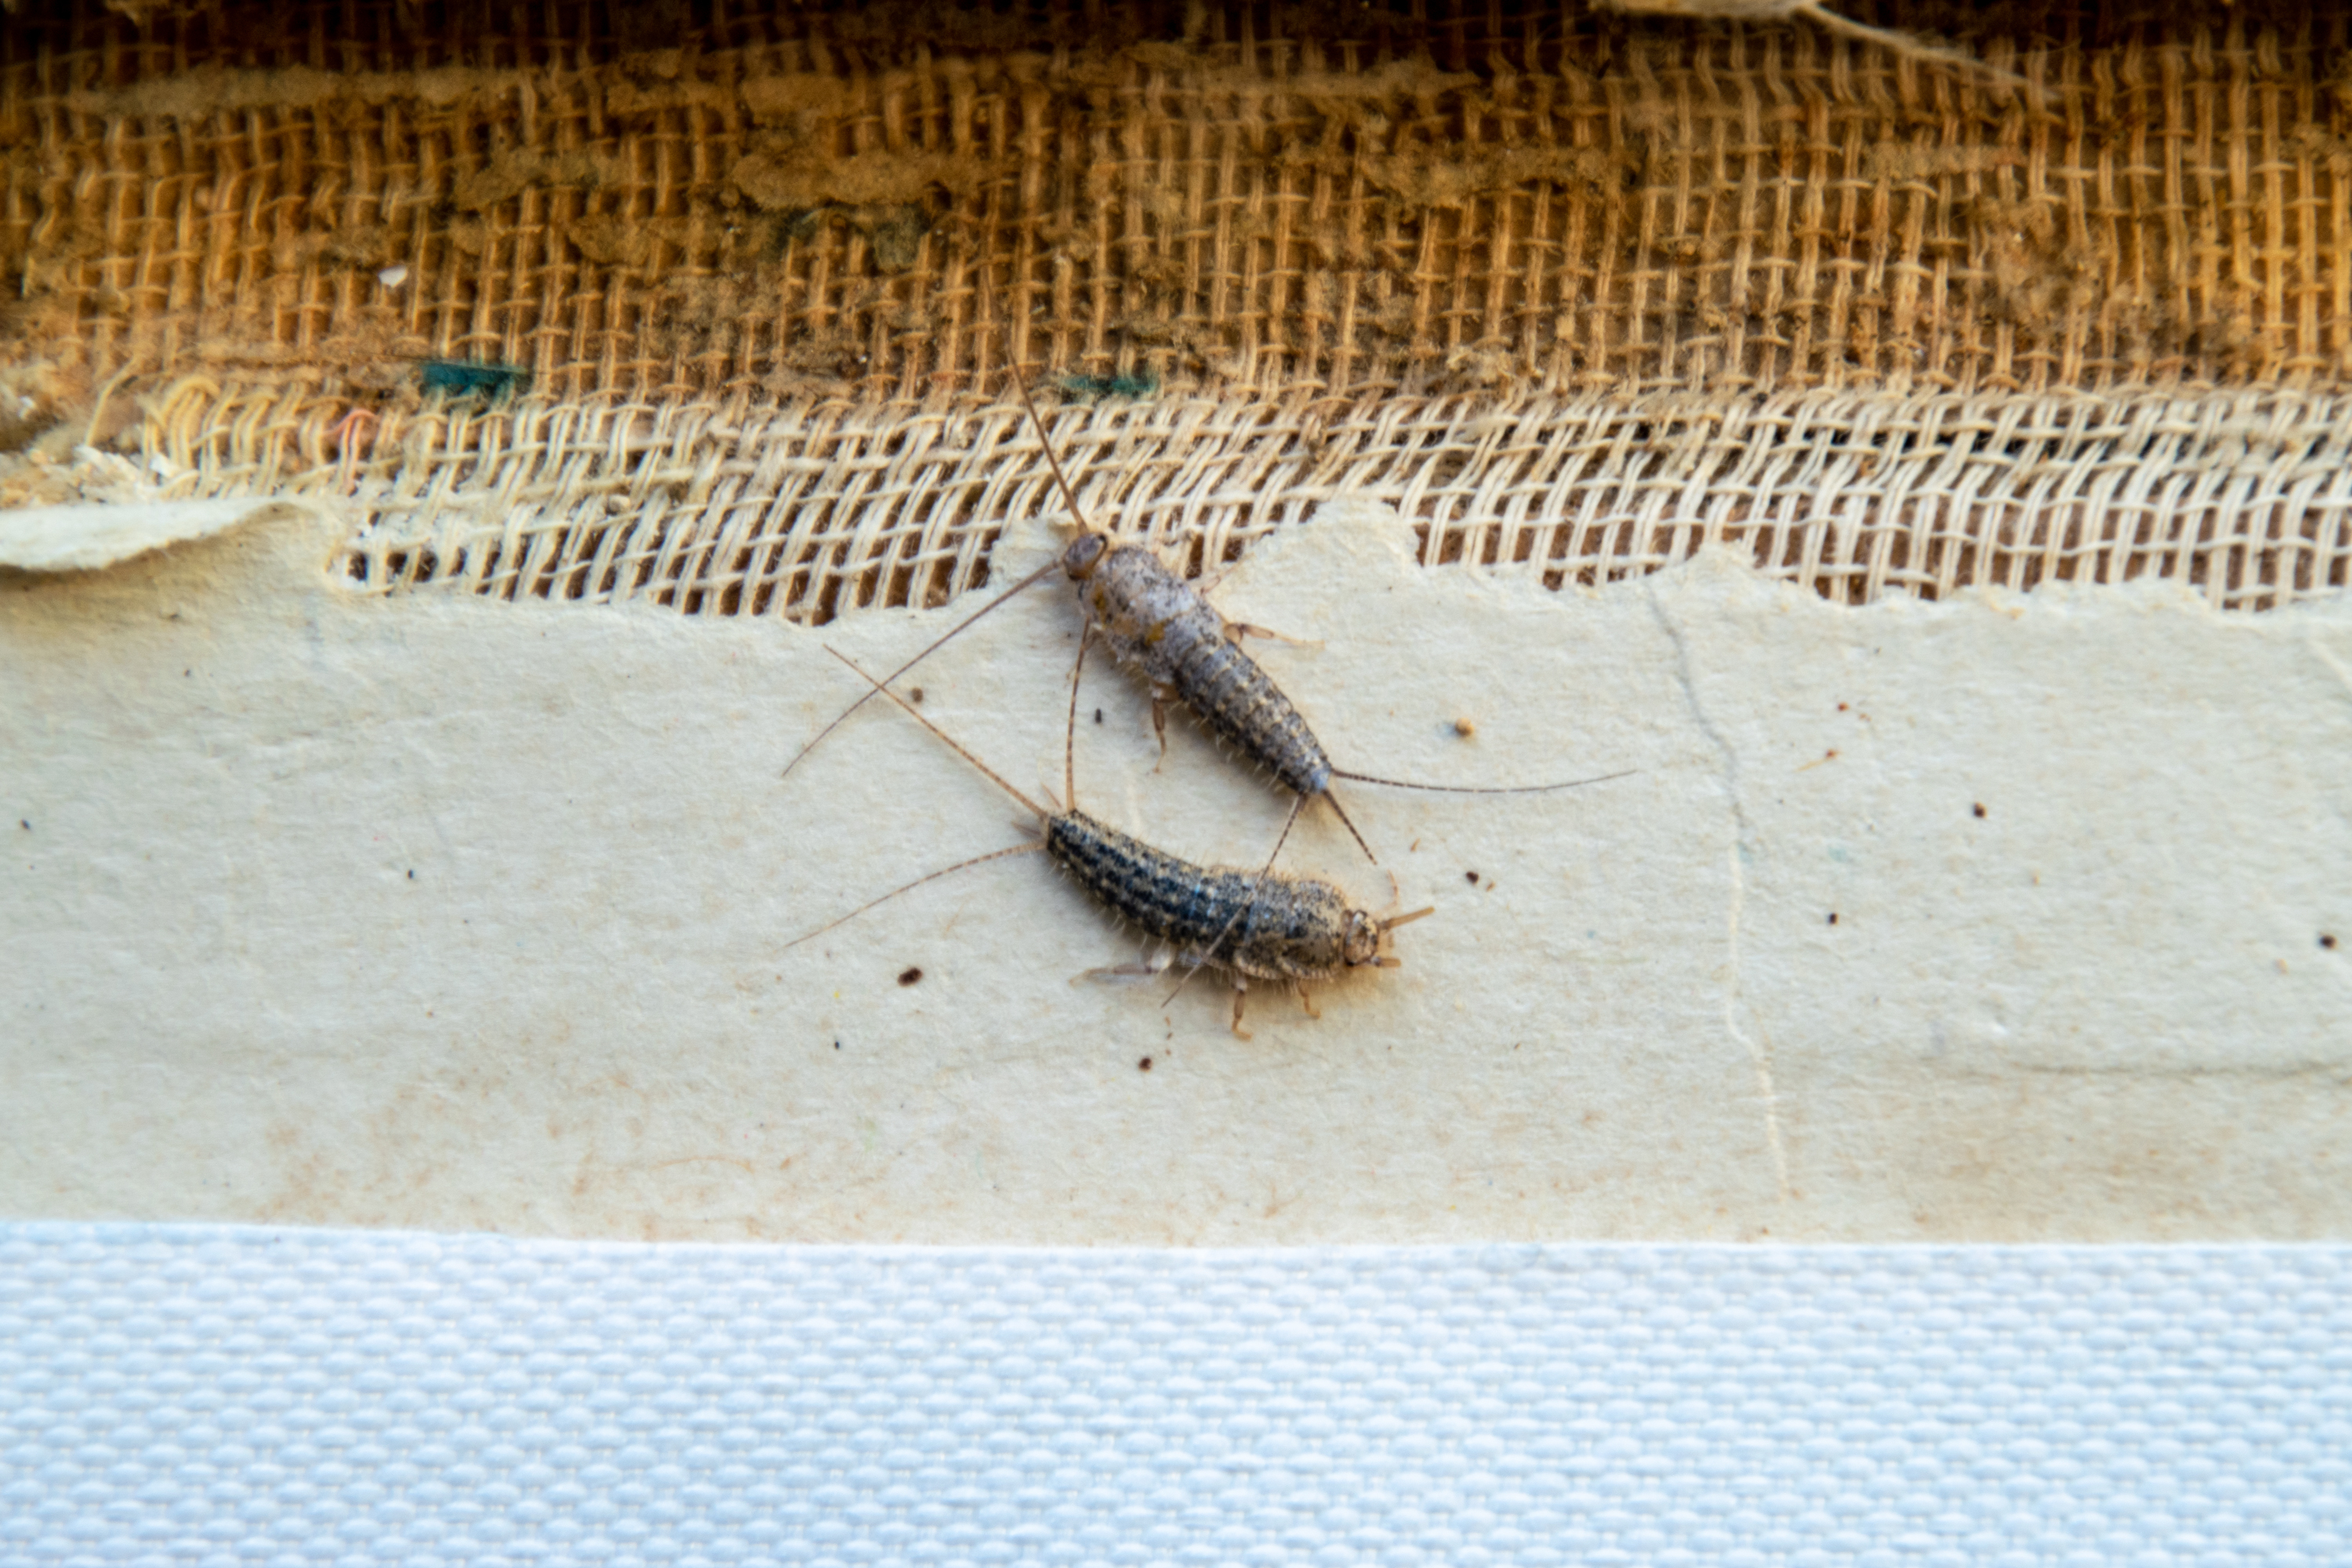 How to Prevent a Silverfish Infestation in Your Home